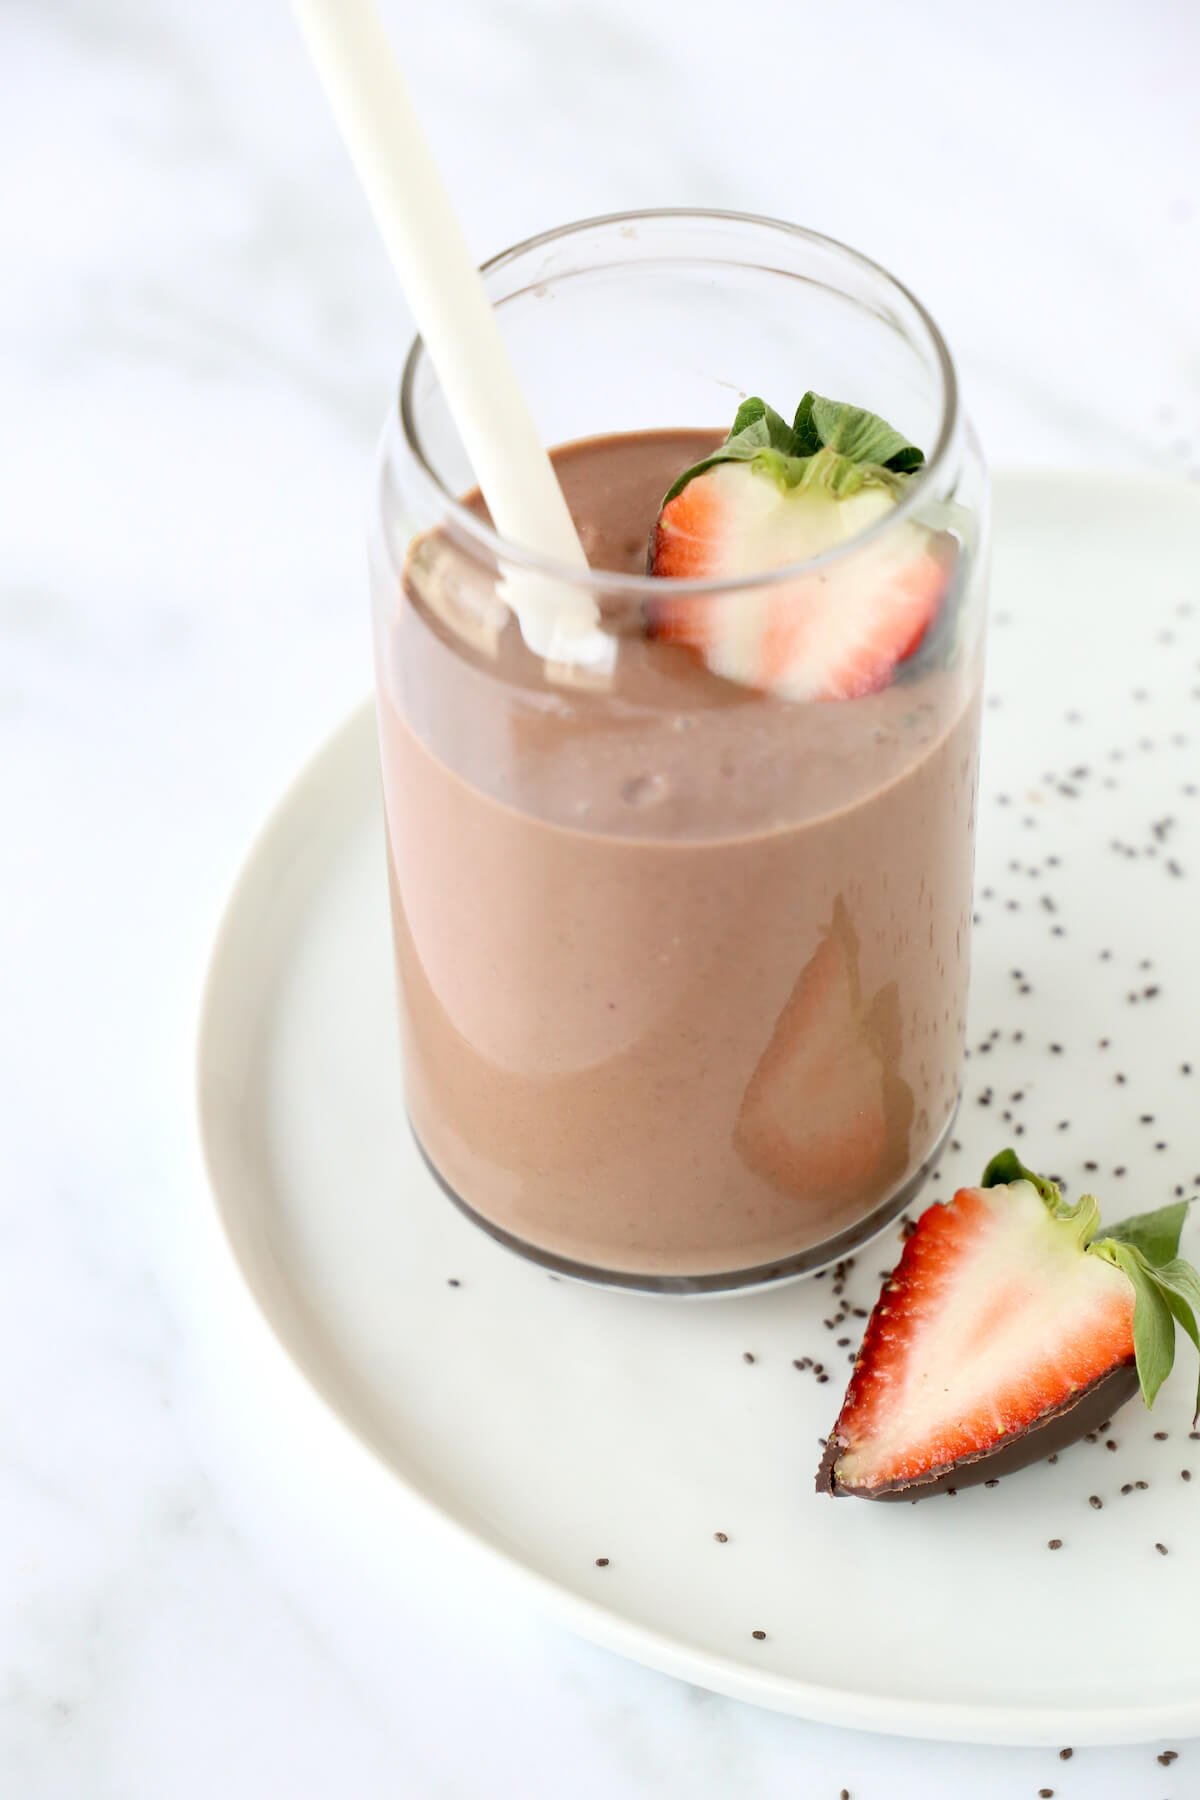 A clear glass sitting on a white plate filled with chocolate brown smoothie, a white straw and a sliced strawberry.  